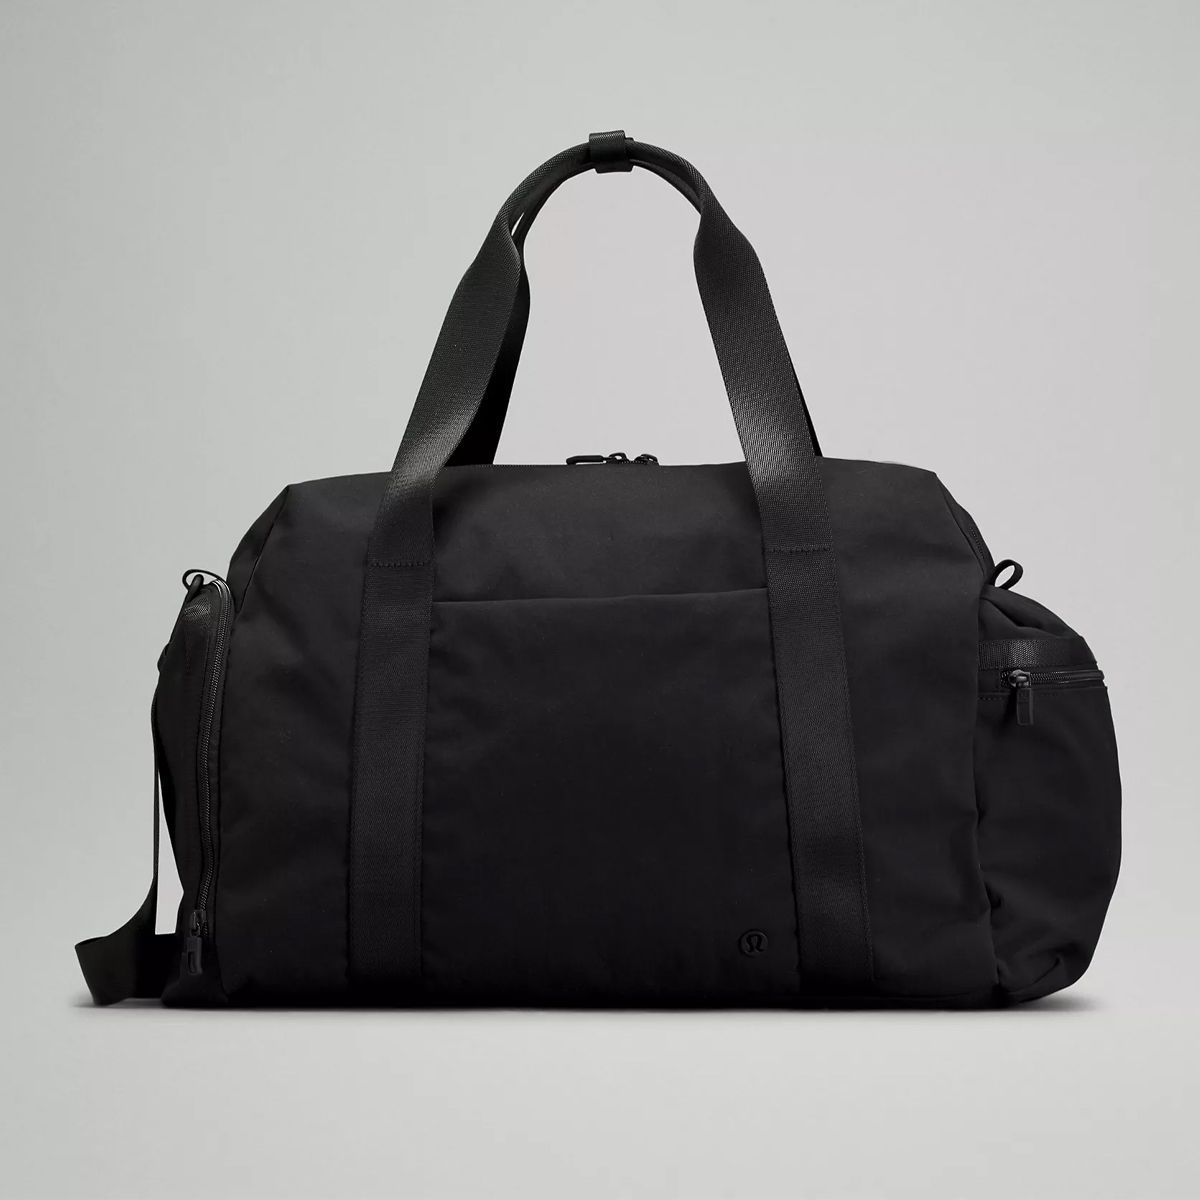 15 Best Gym Bags for Men 2023 - Men's Gym Duffles and Backpacks